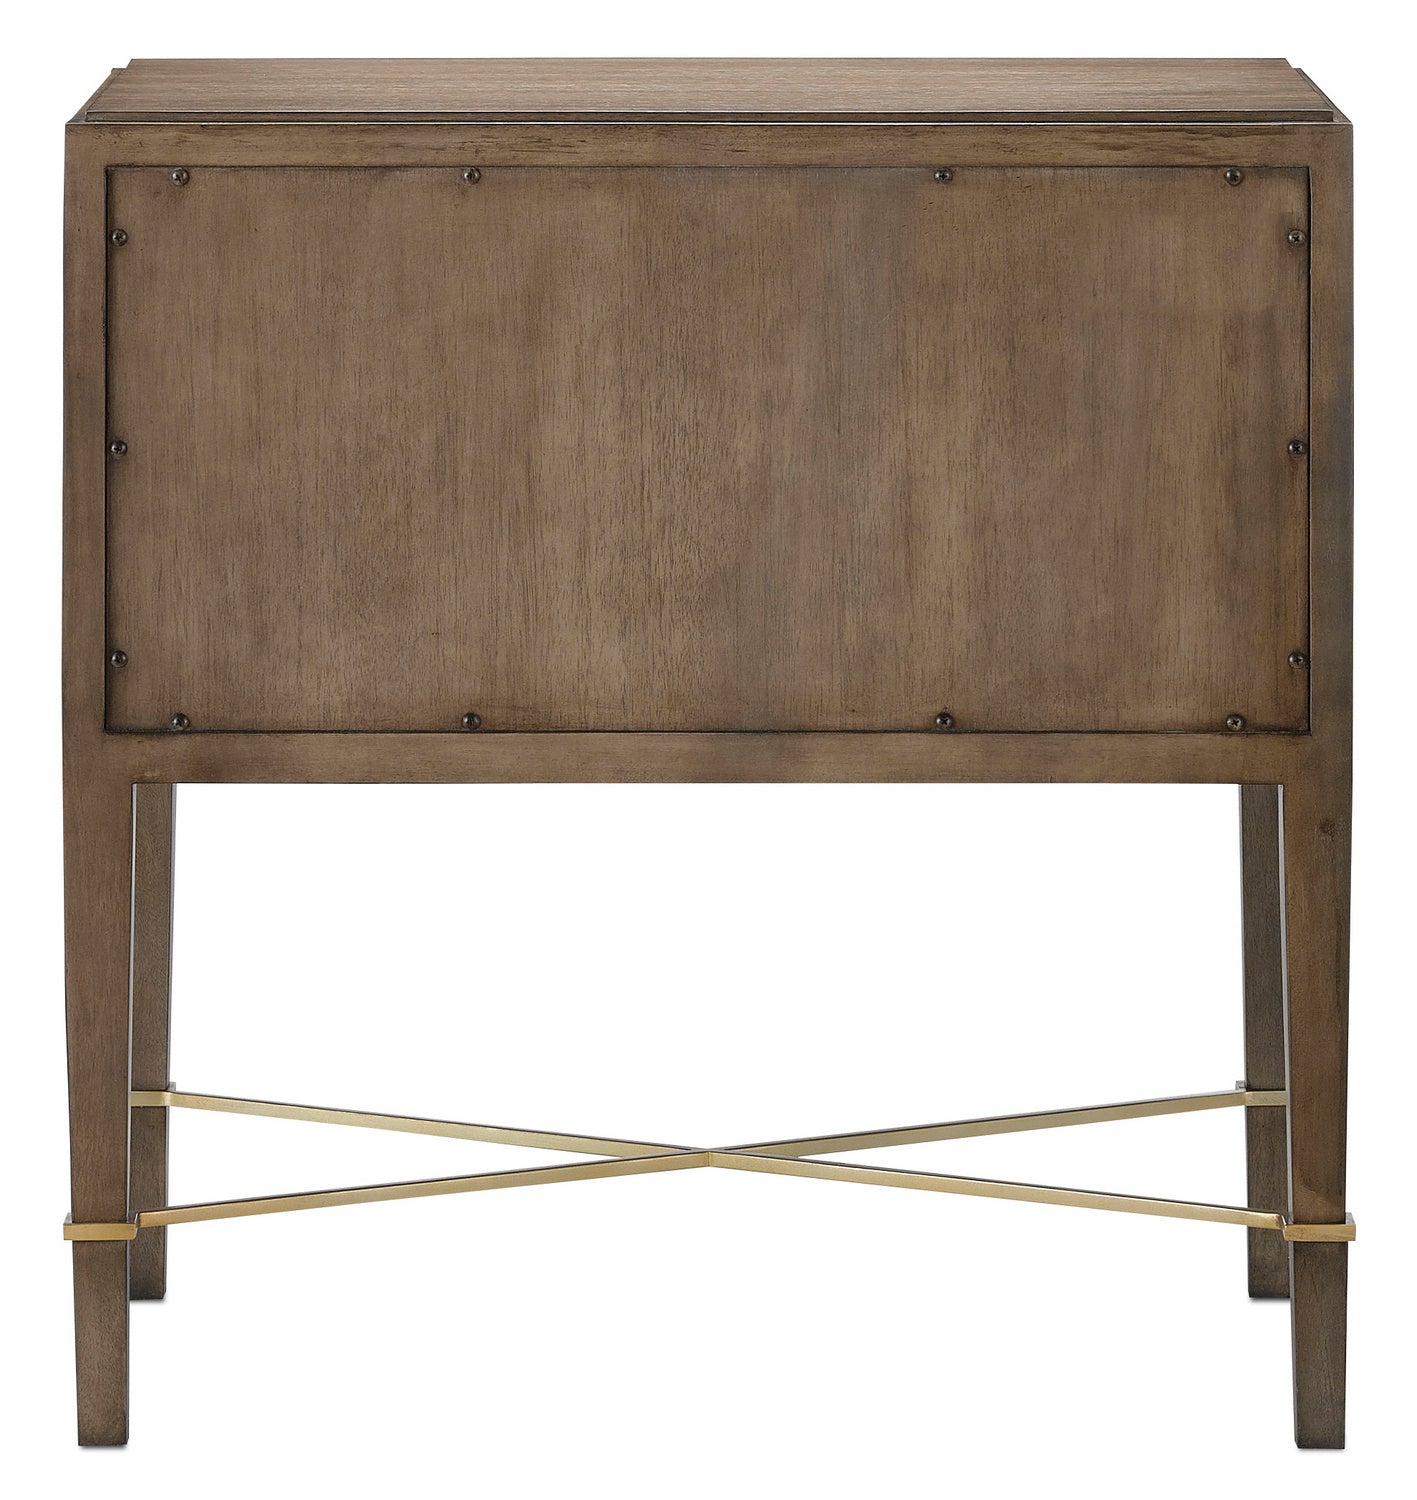 Nightstand from the Verona collection in Chanterelle/Coffee/Champagne finish